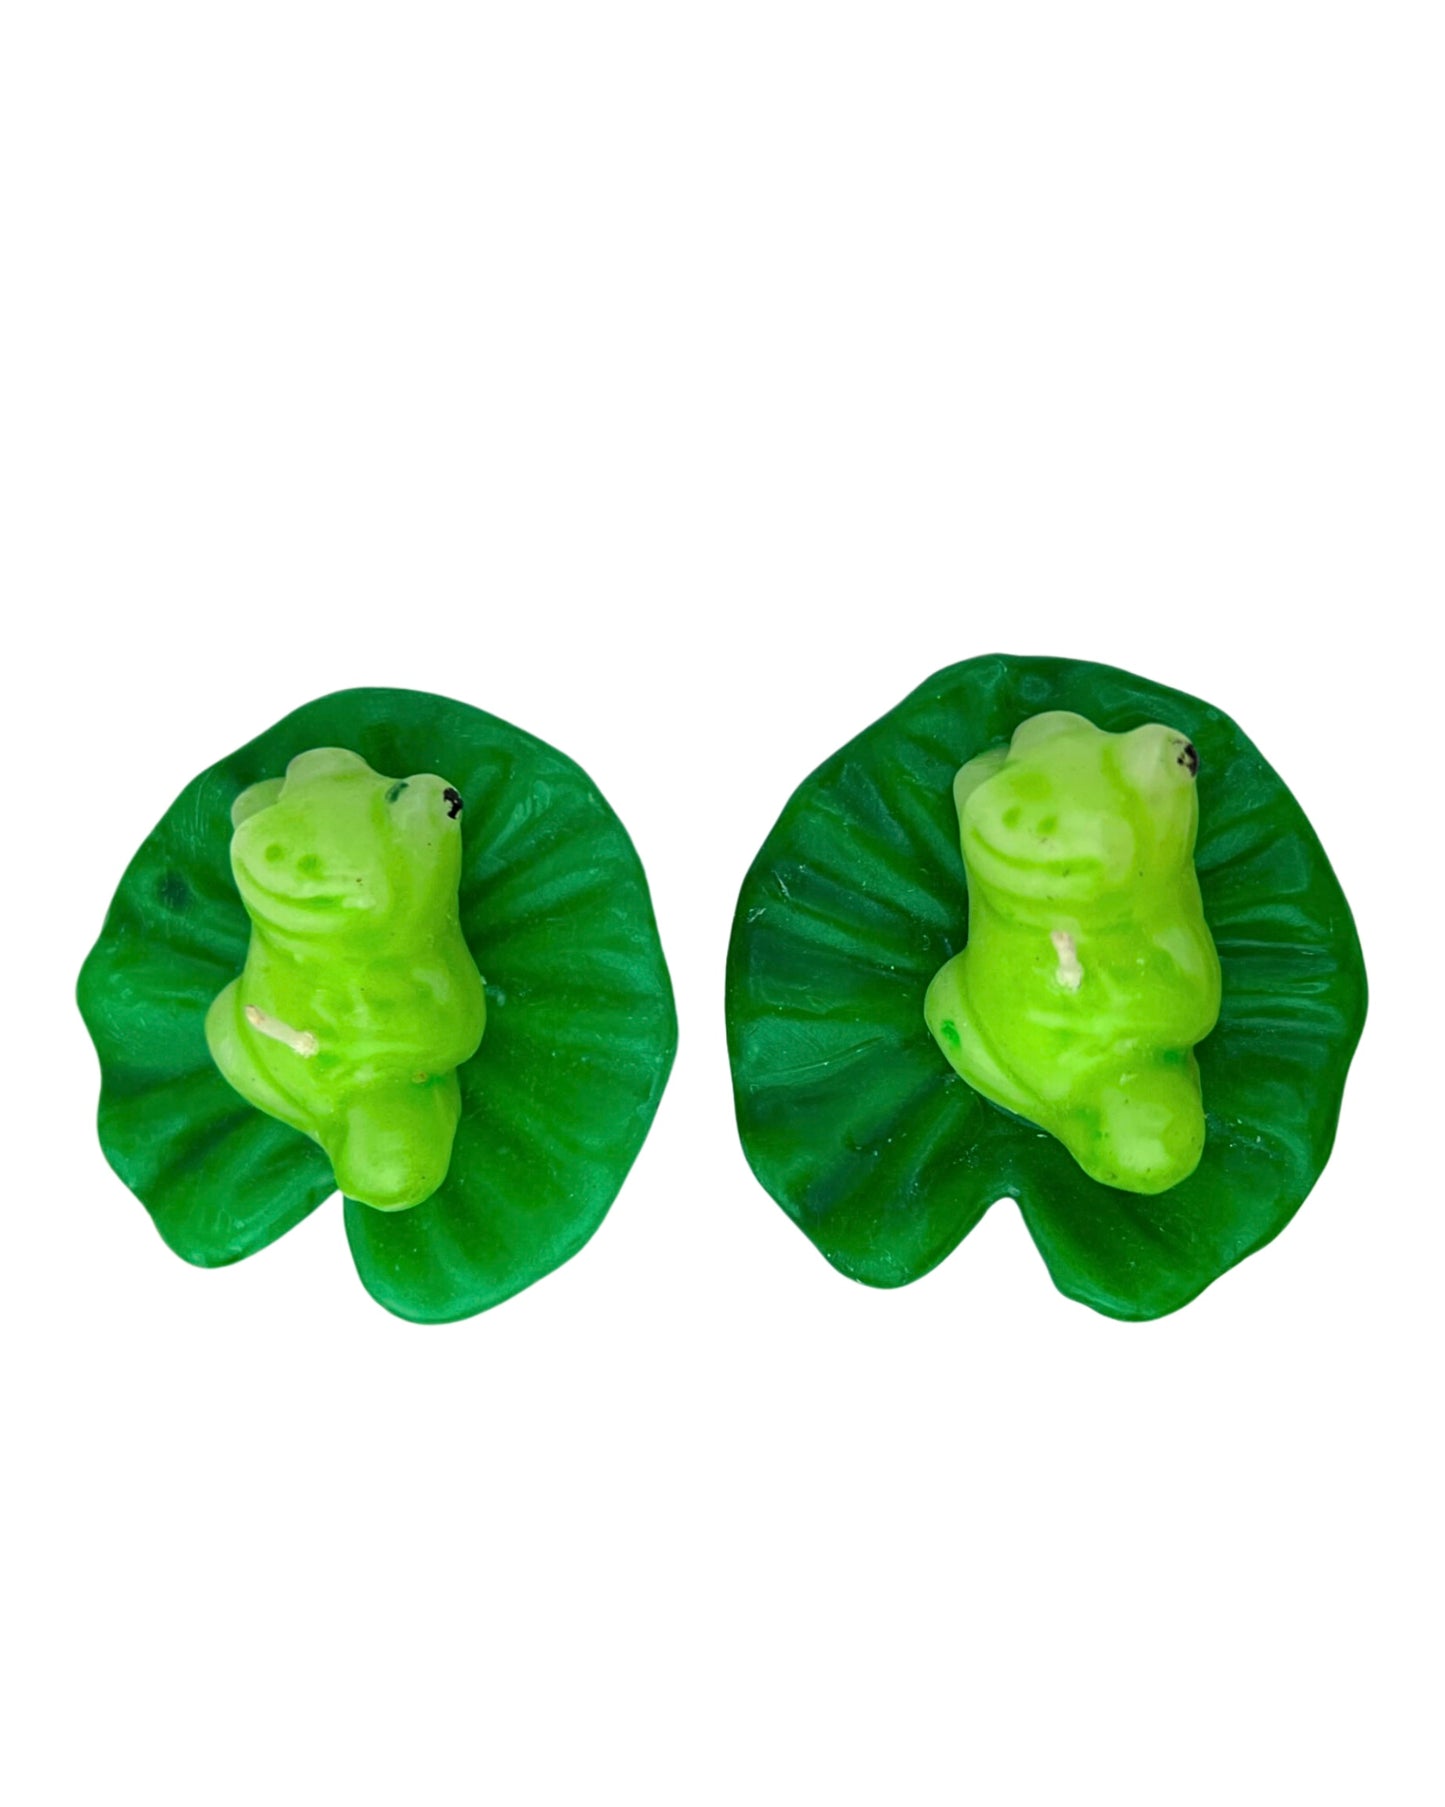 00’s Y2K Set of 2 Floating Frogs Candles